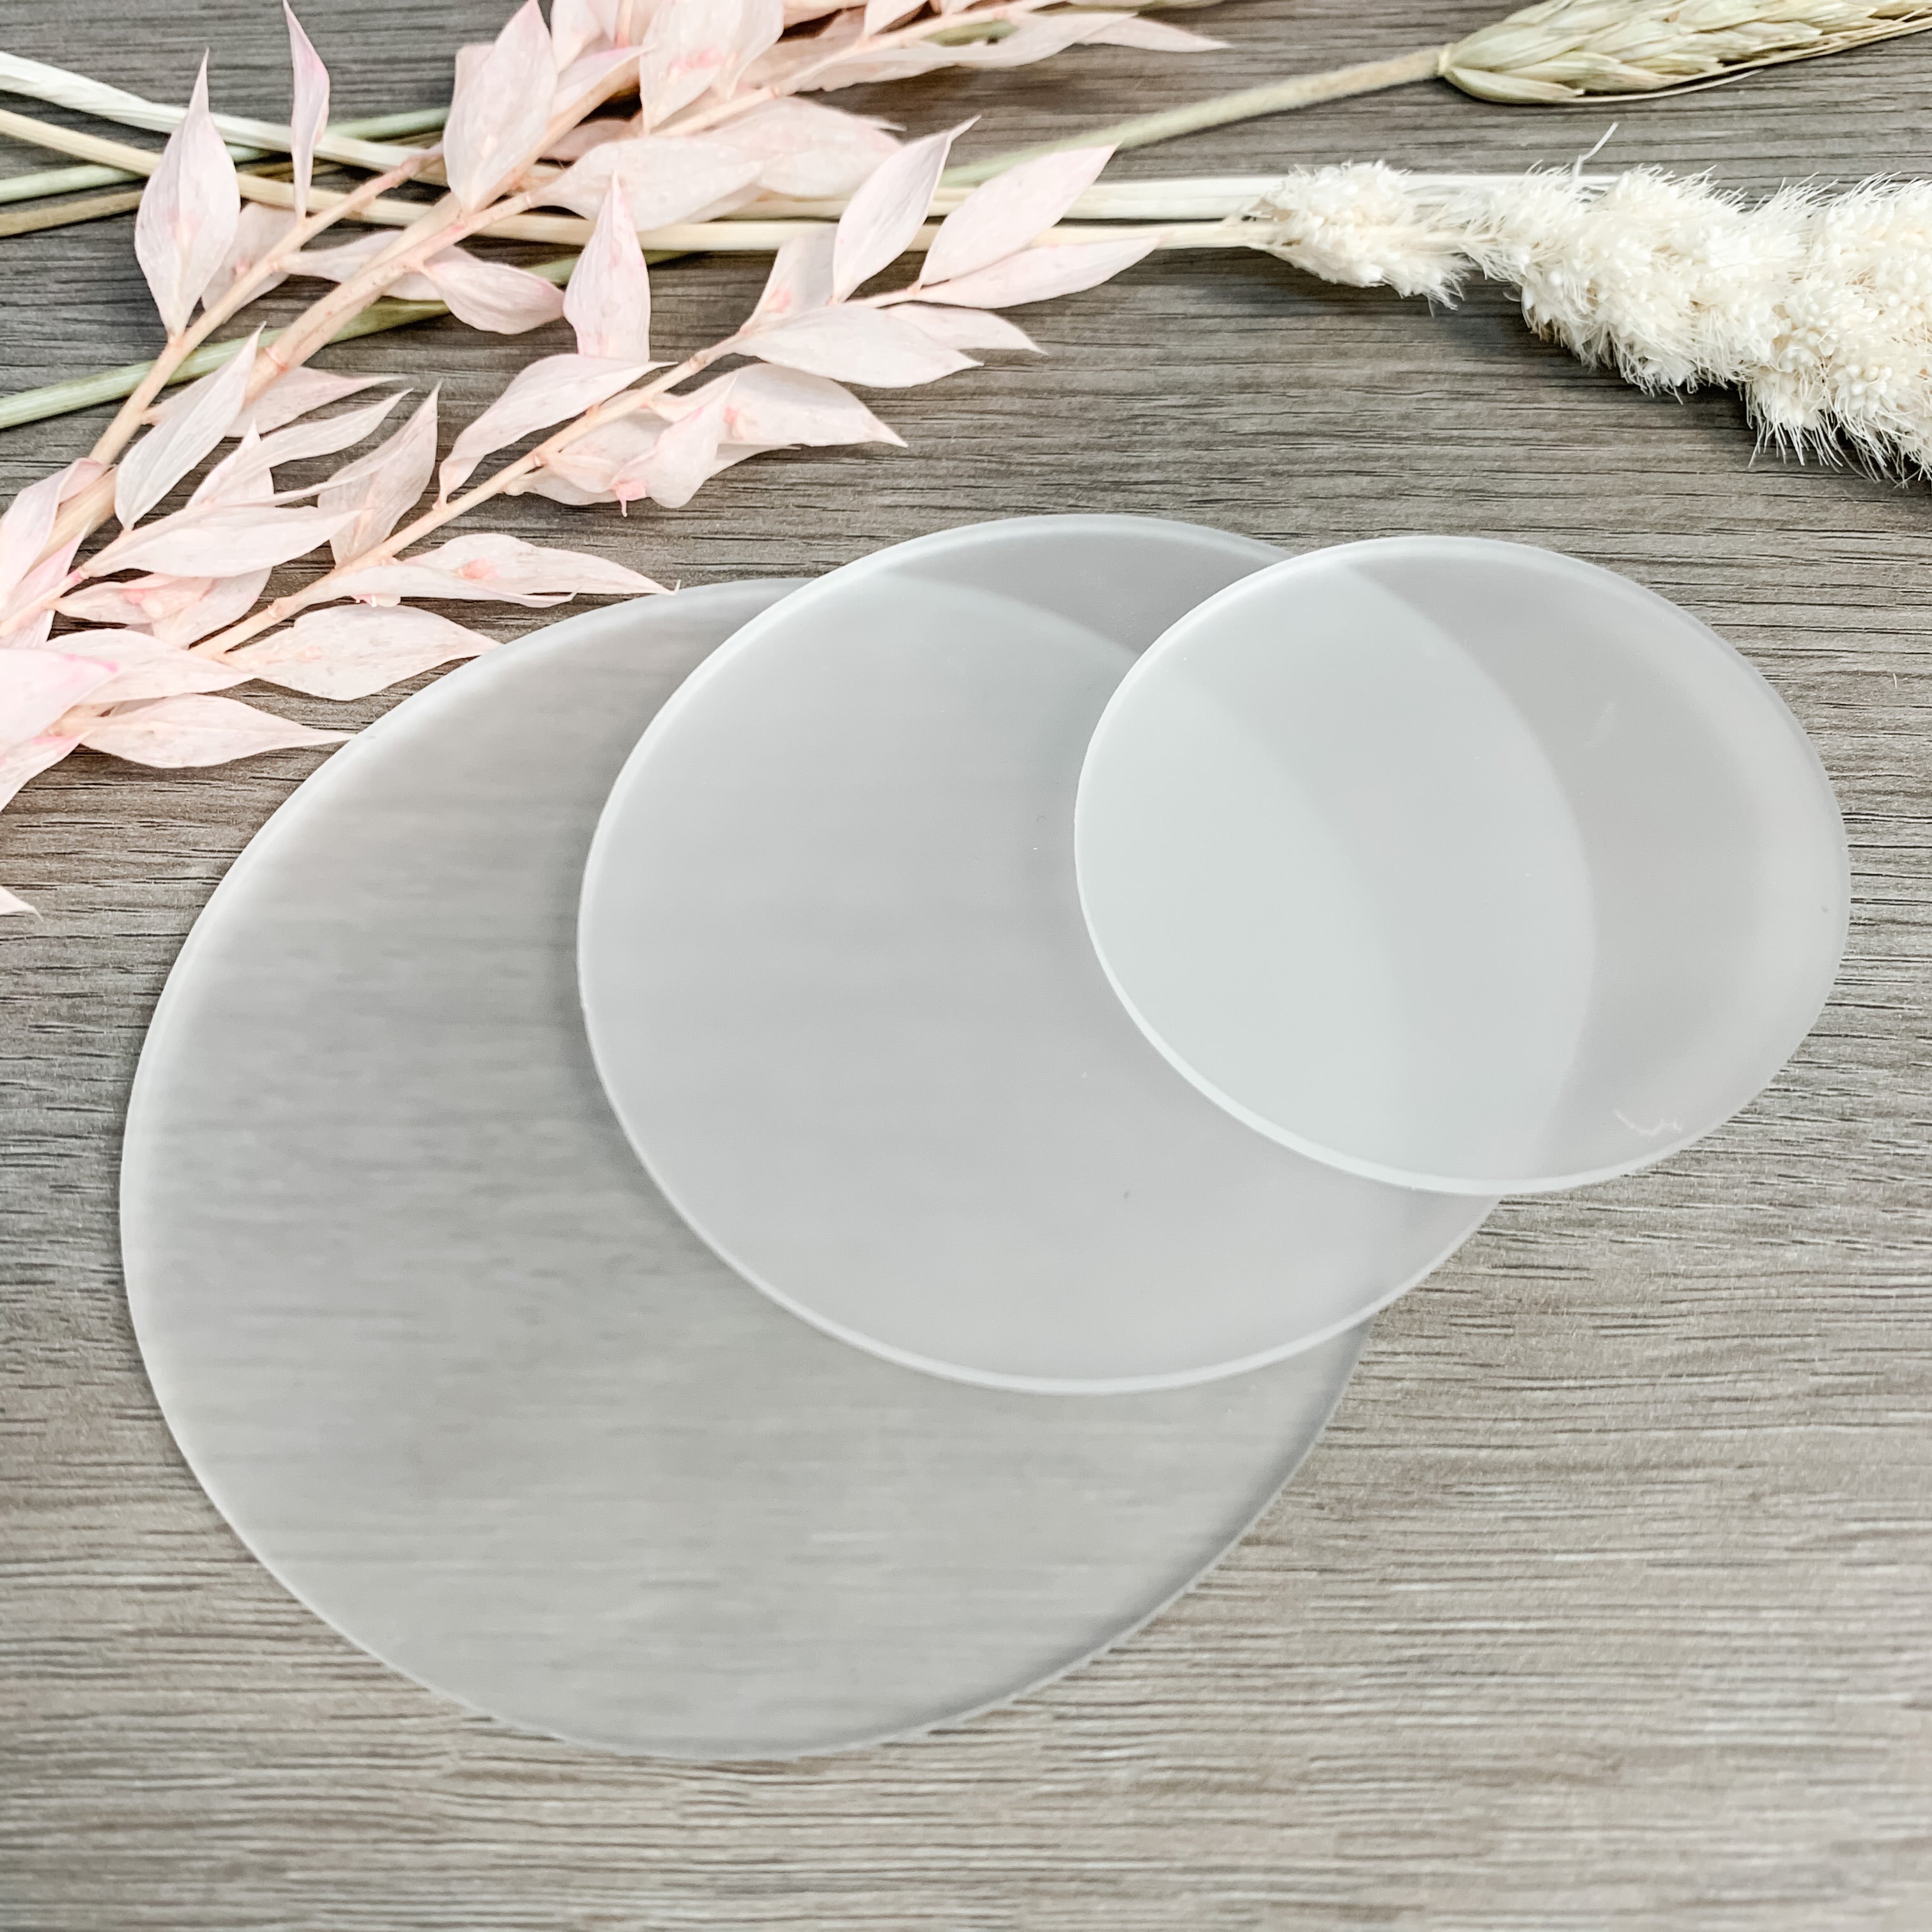 Frosted Acrylic Blank Circles